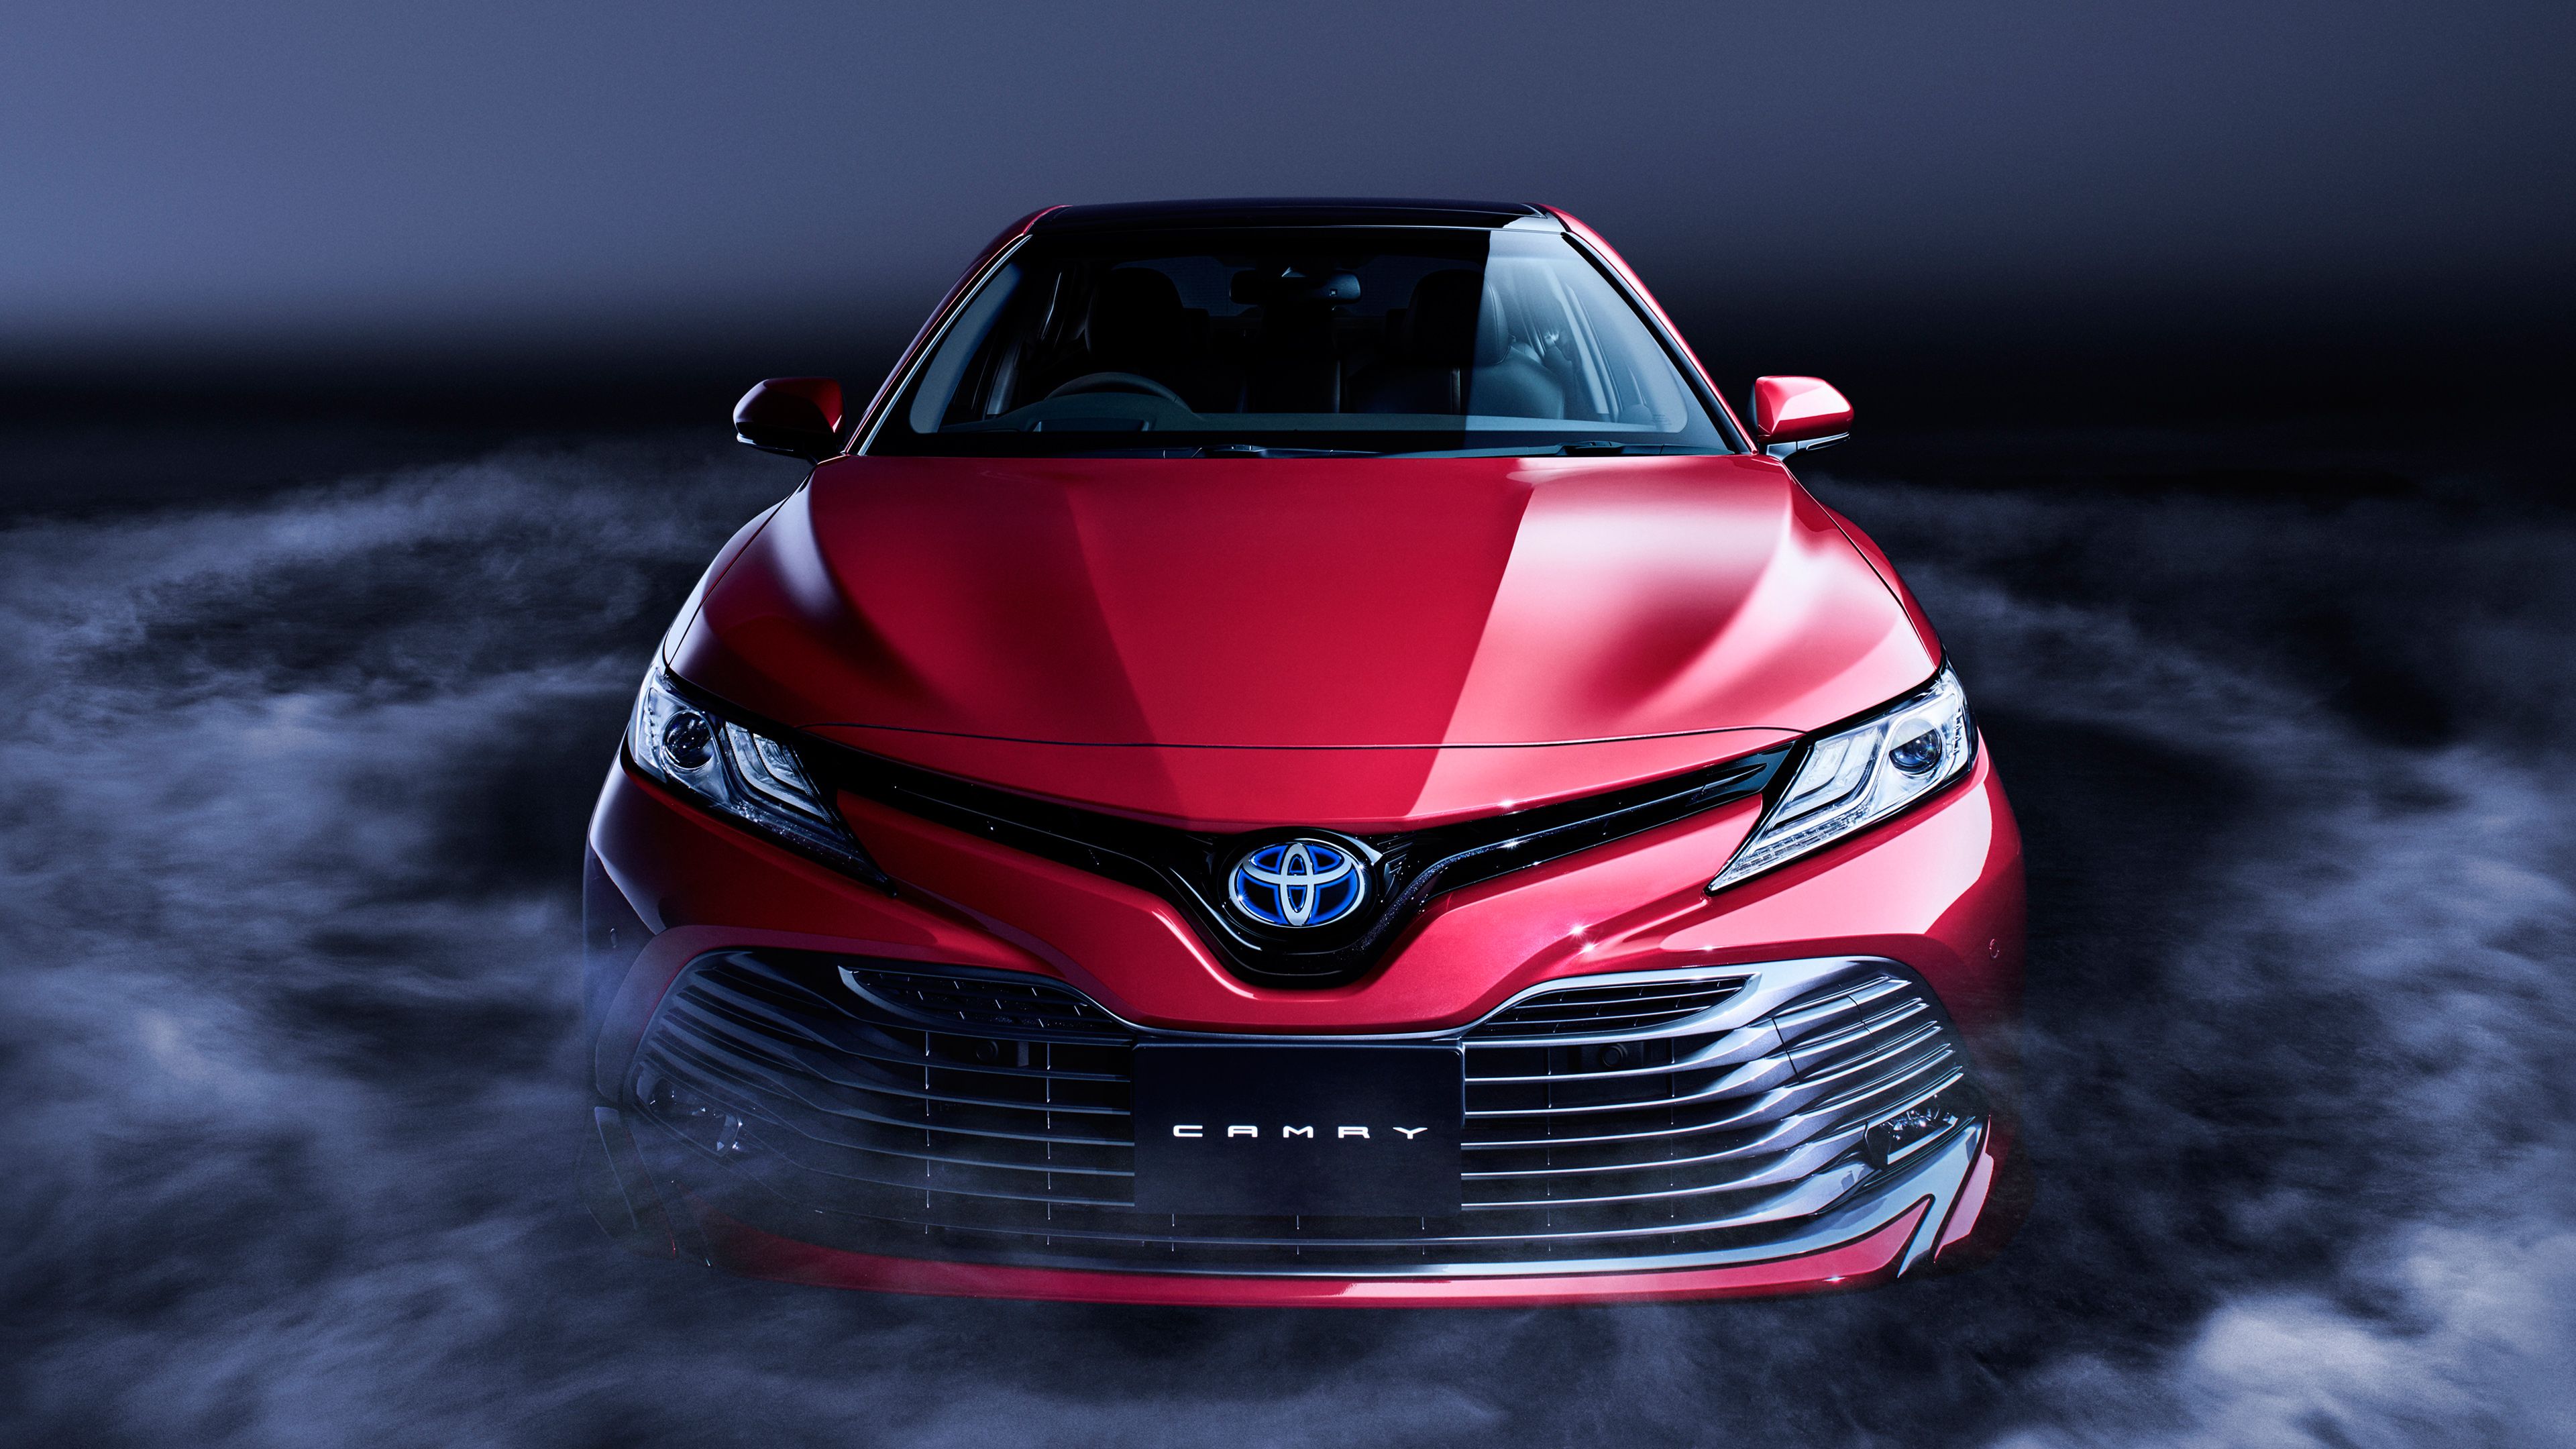 Desktop Wallpaper Toyota Camry, Red Car, Front View, 4k, HD Image, Picture, Background, 94cda5